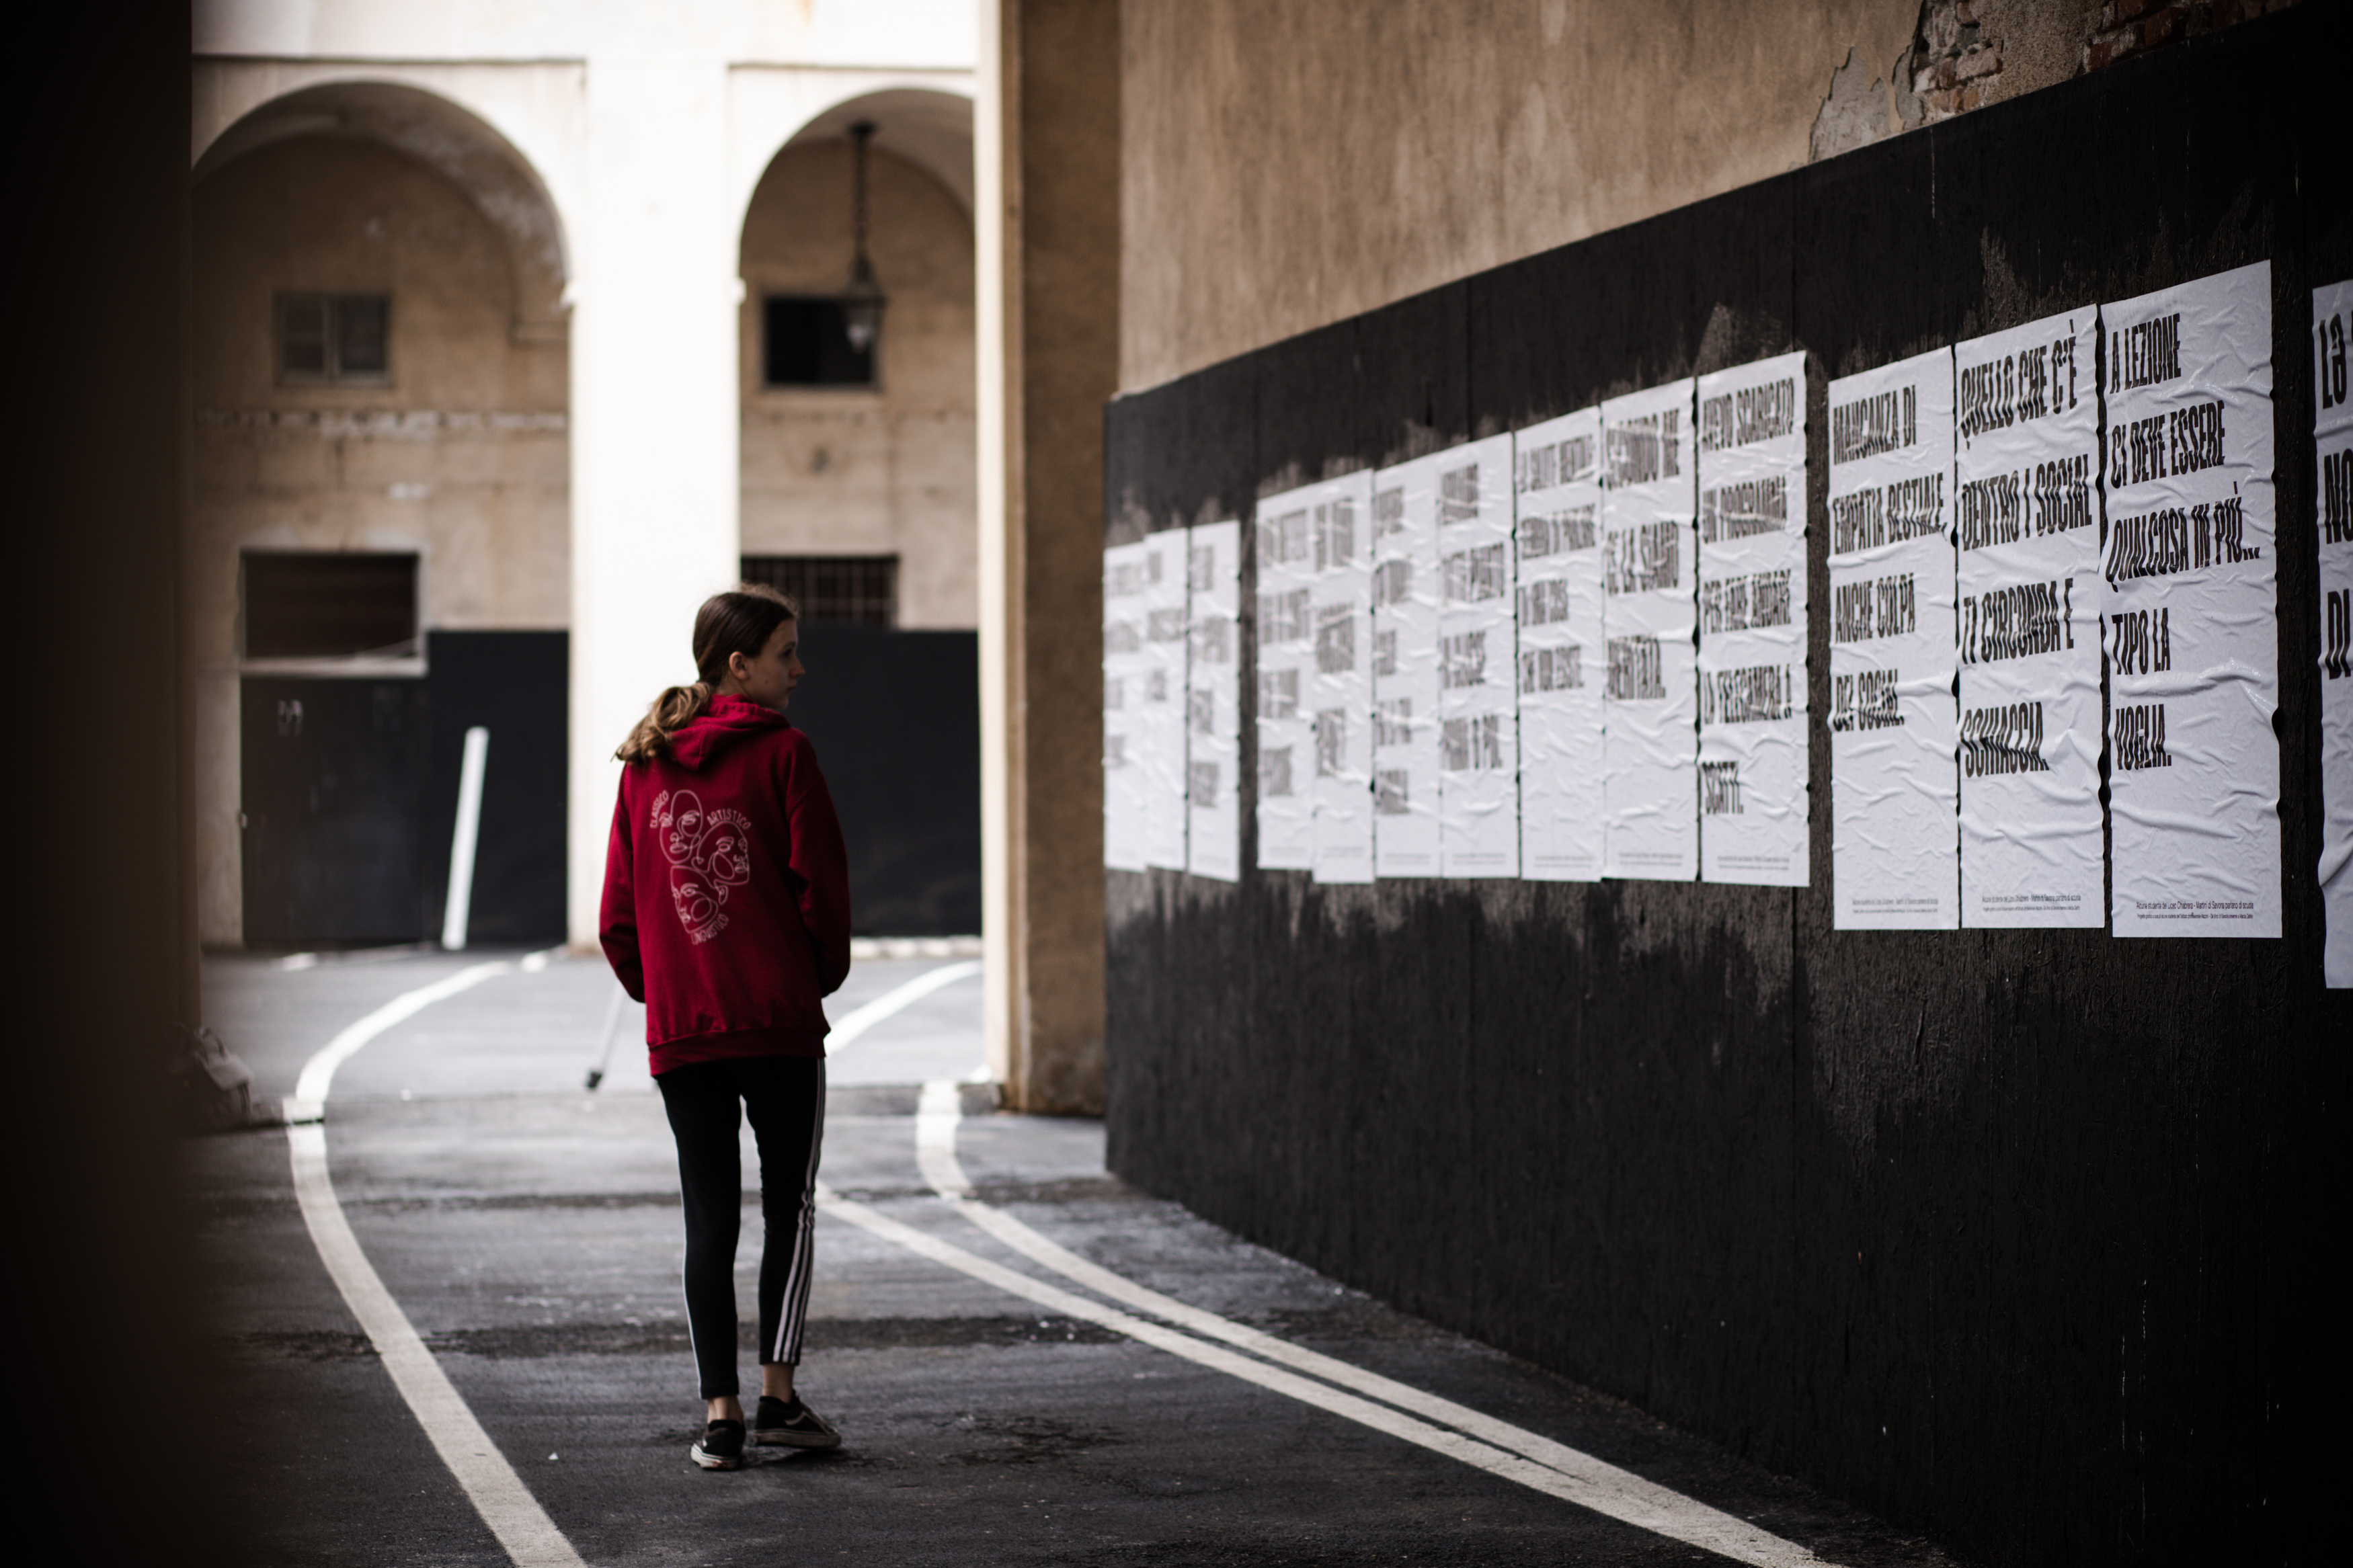 A person standing in a street next to a wall with white posters